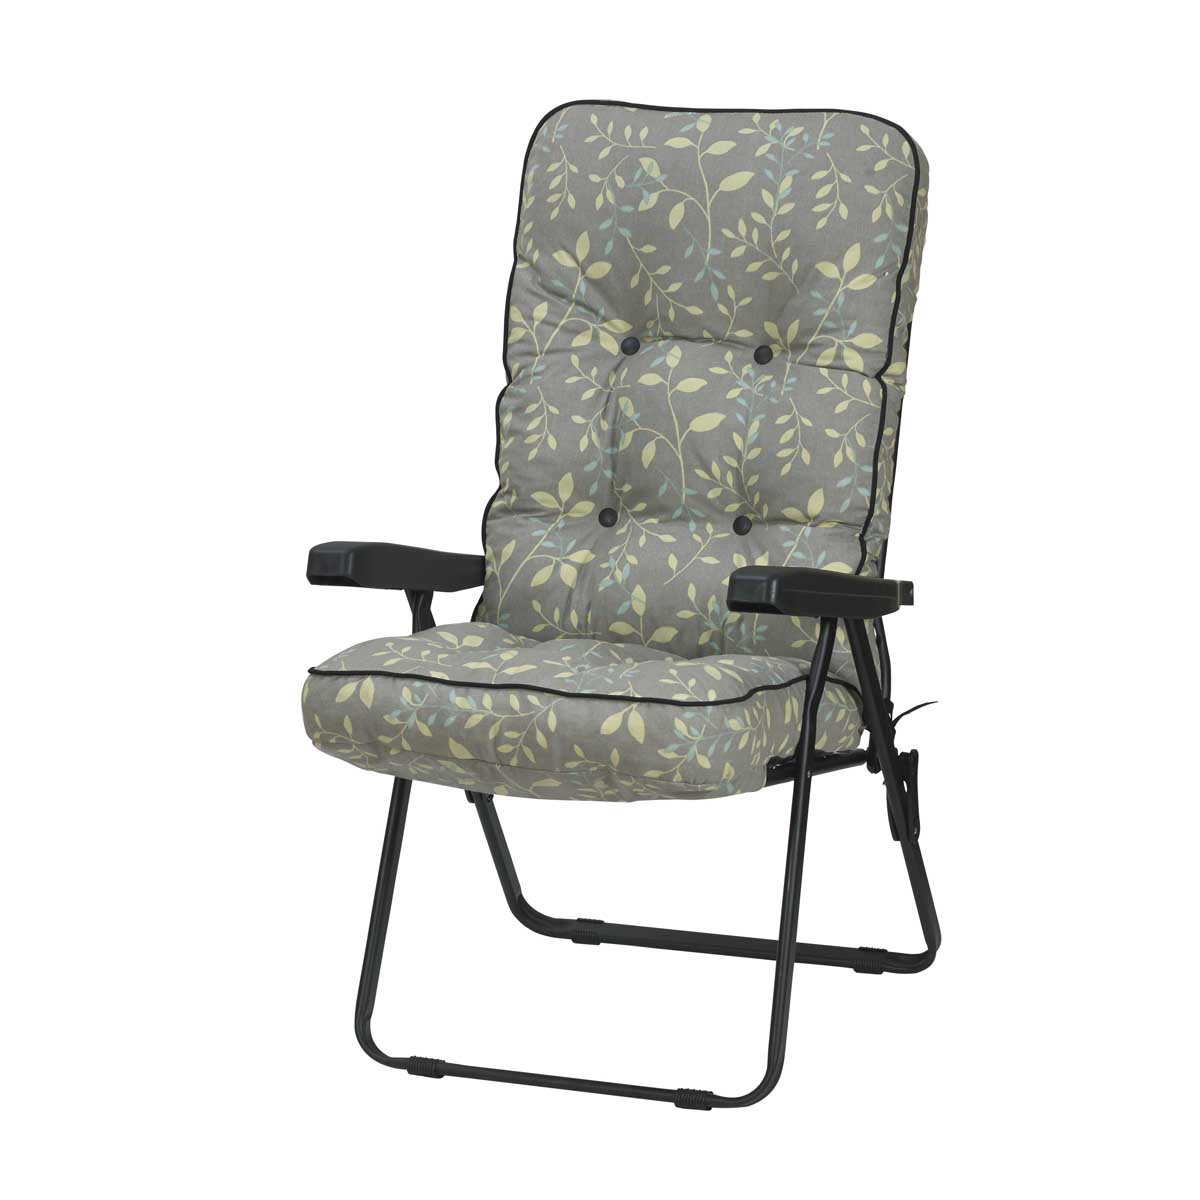 GL1326 Deluxe Recliner Country Teal